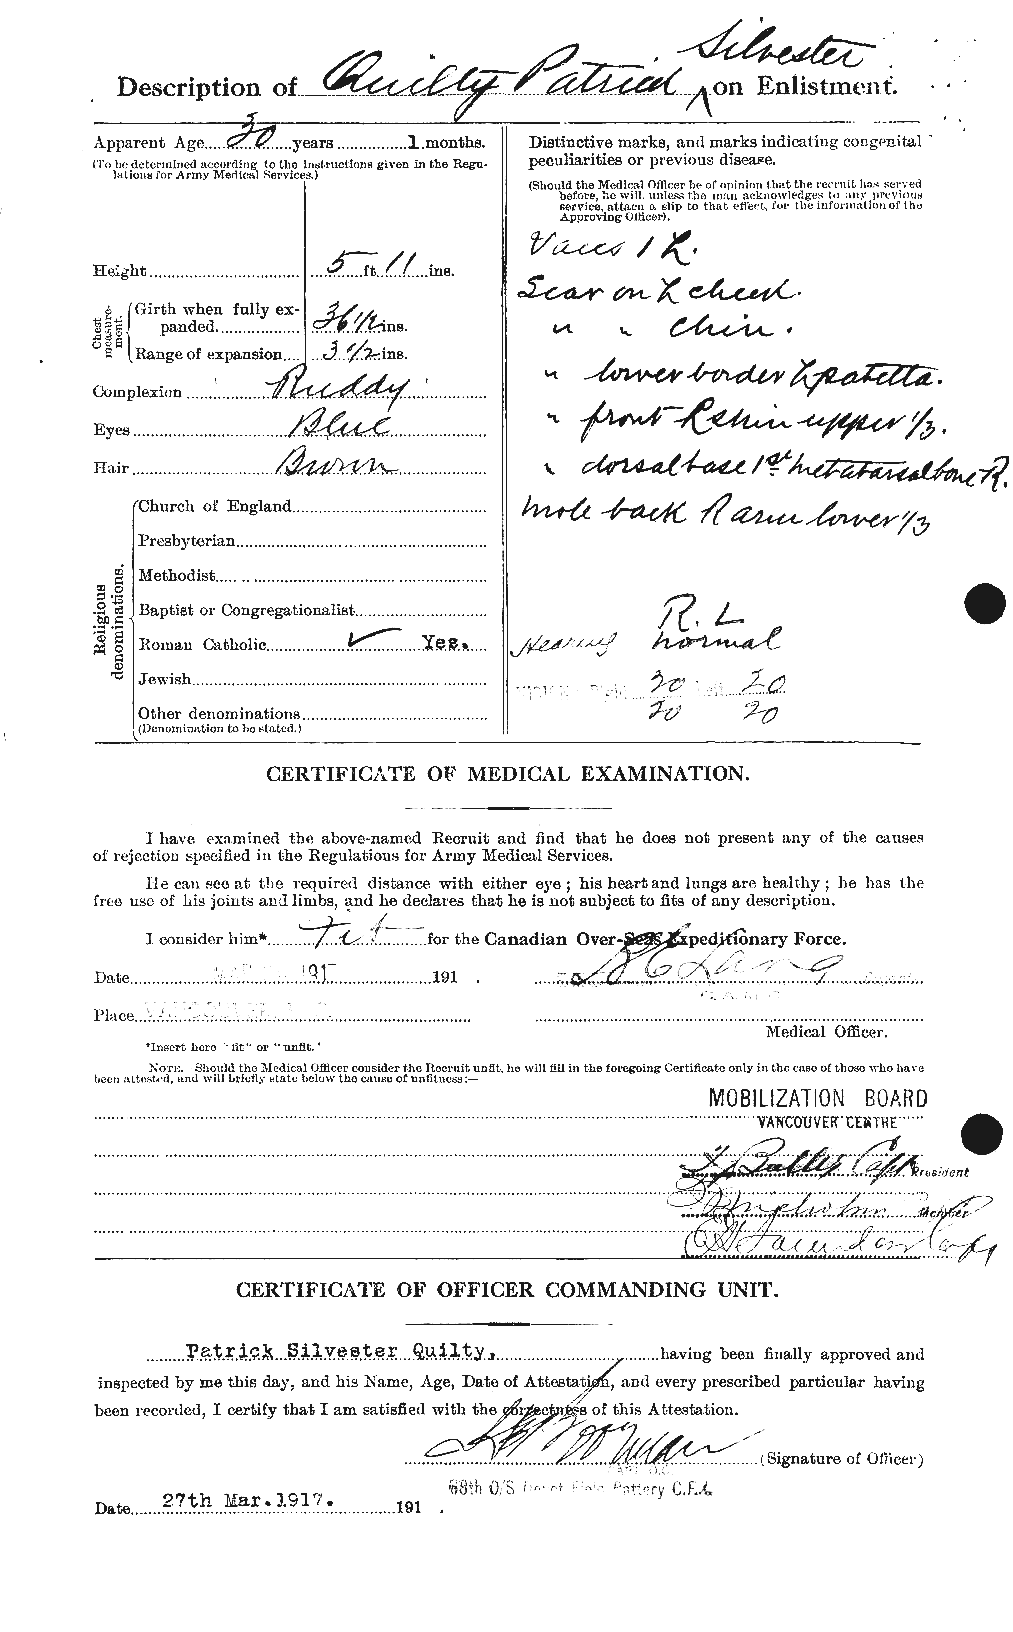 Personnel Records of the First World War - CEF 590145b